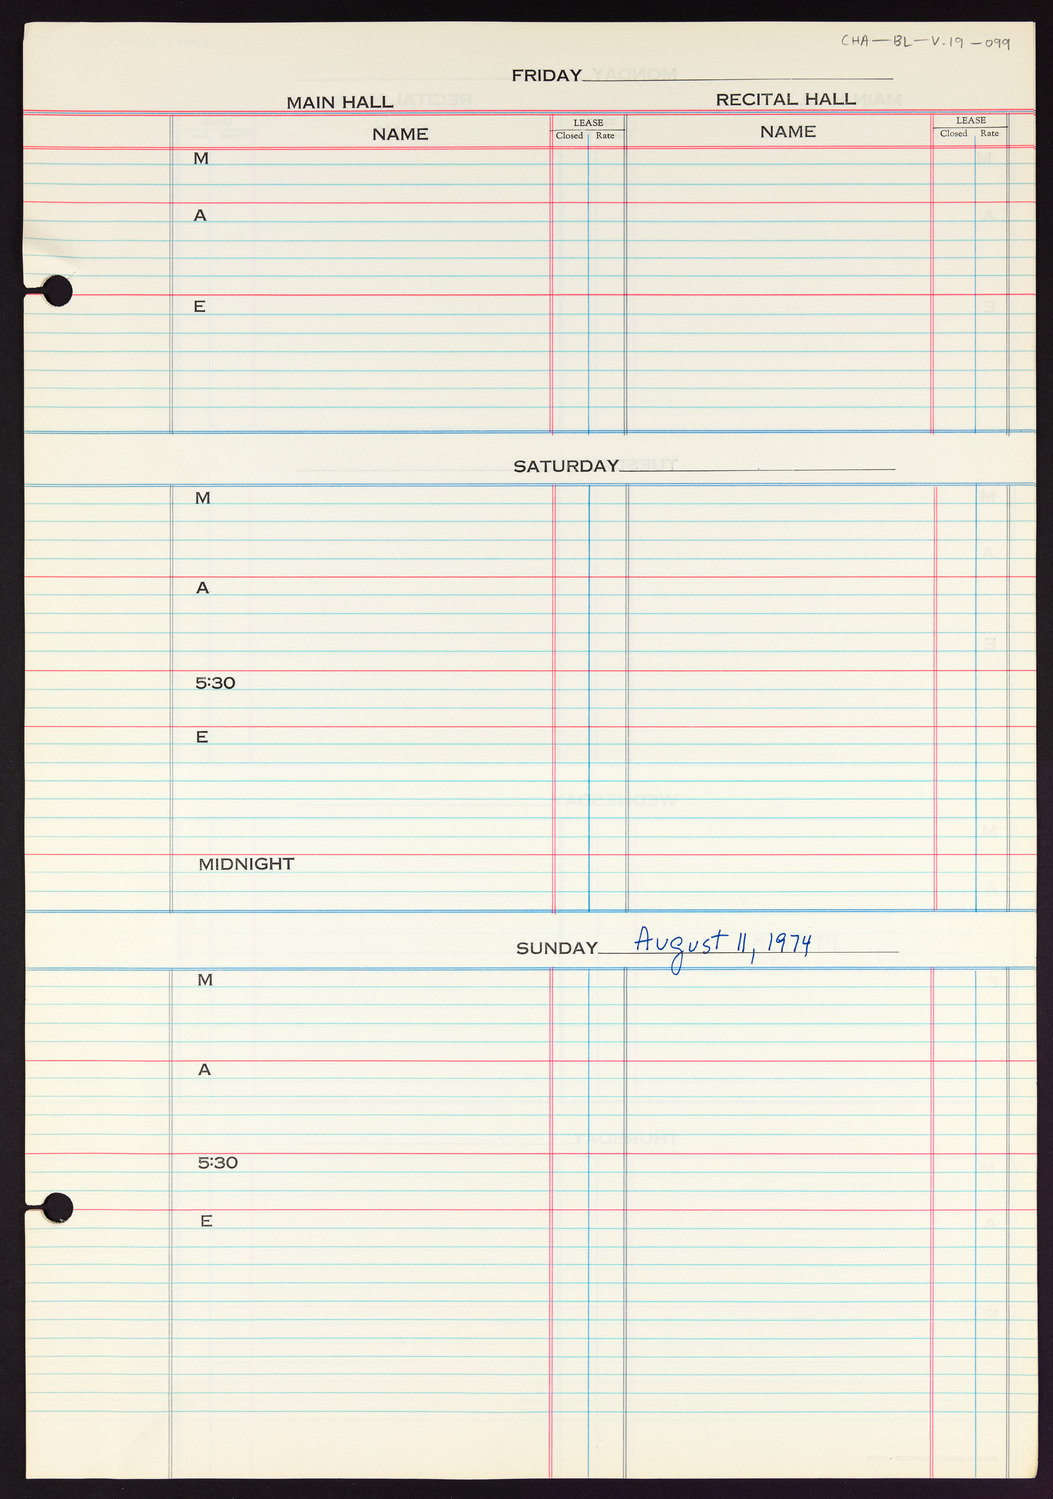 Carnegie Hall Booking Ledger, volume 19, page 99